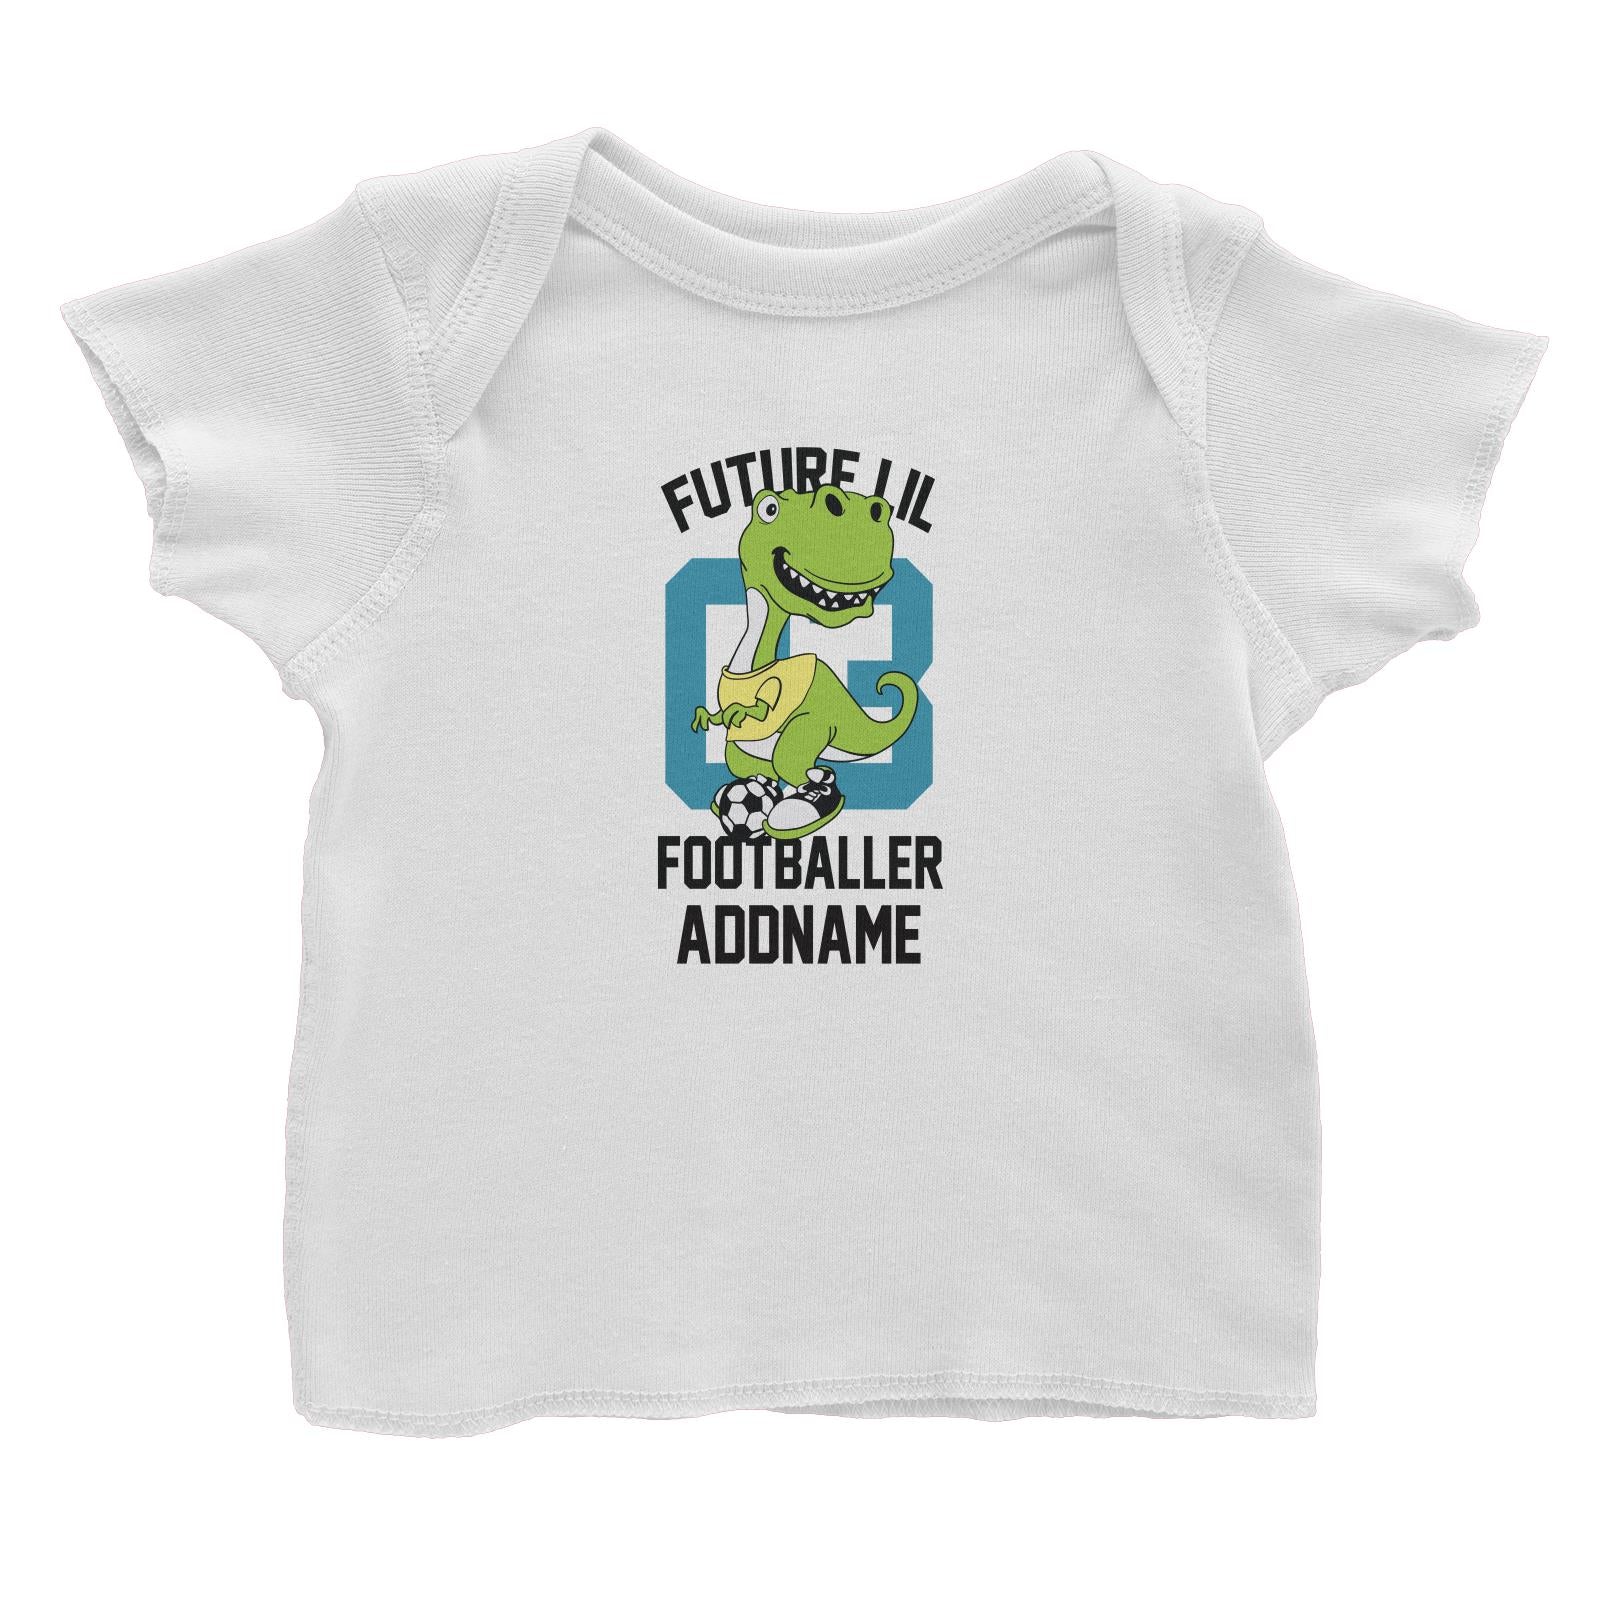 Cool Vibrant Series Future Lil Footballer Dinosaur Addname Baby T-Shirt [SALE]